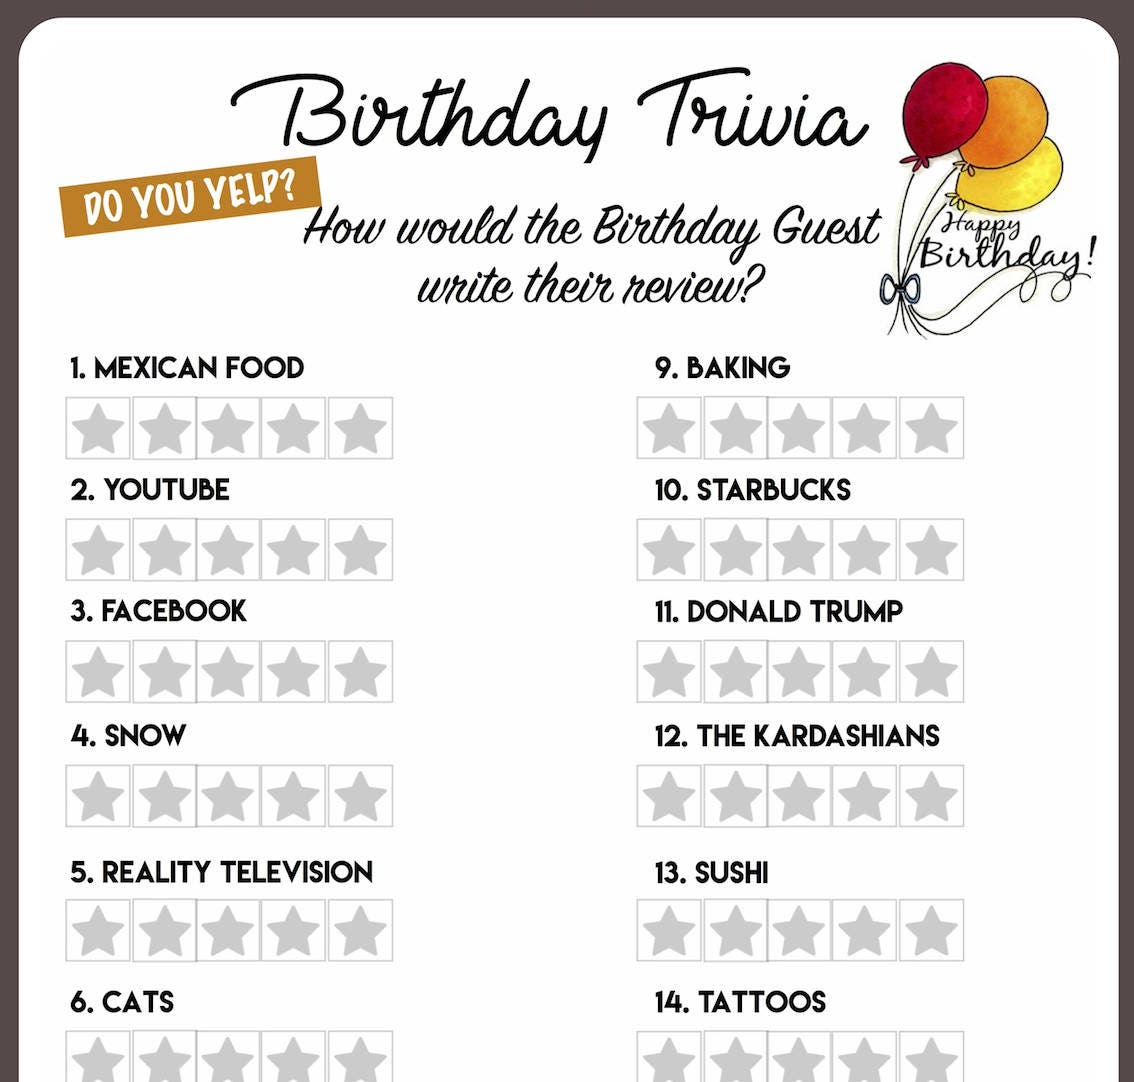 Sample Trivia Questions For Birthday Party If you are in the right